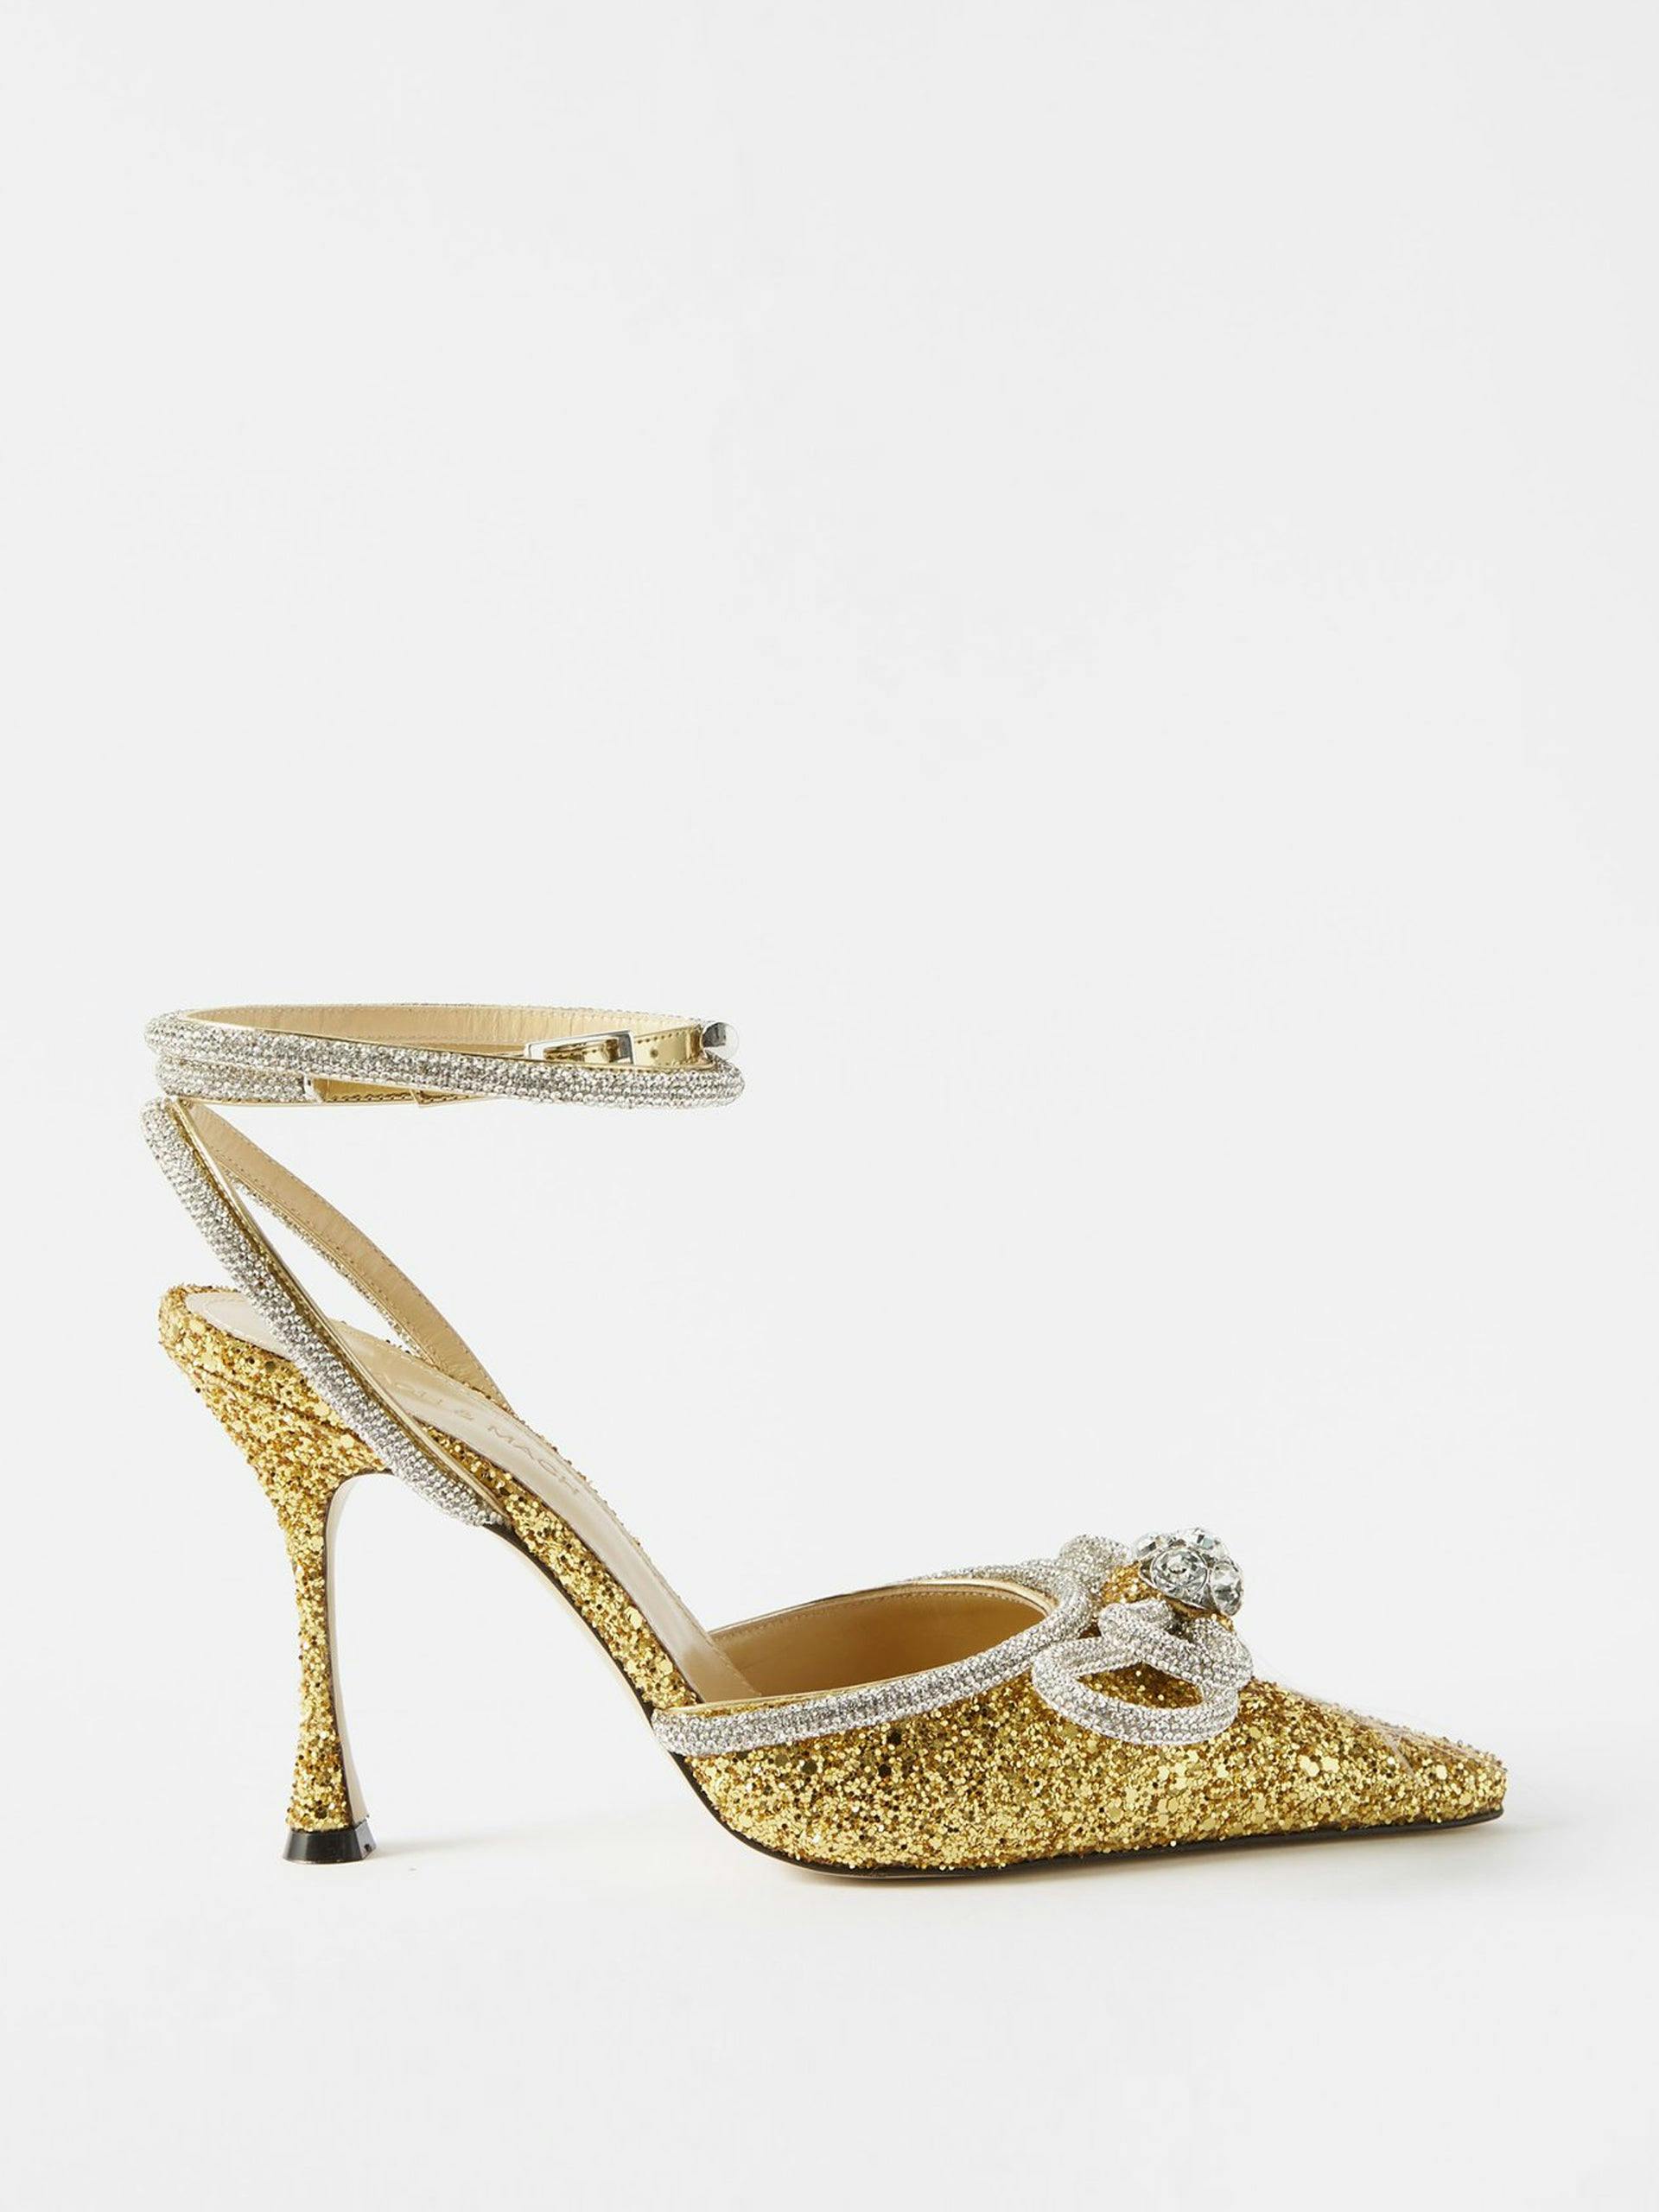 Double bow gold glitter pumps